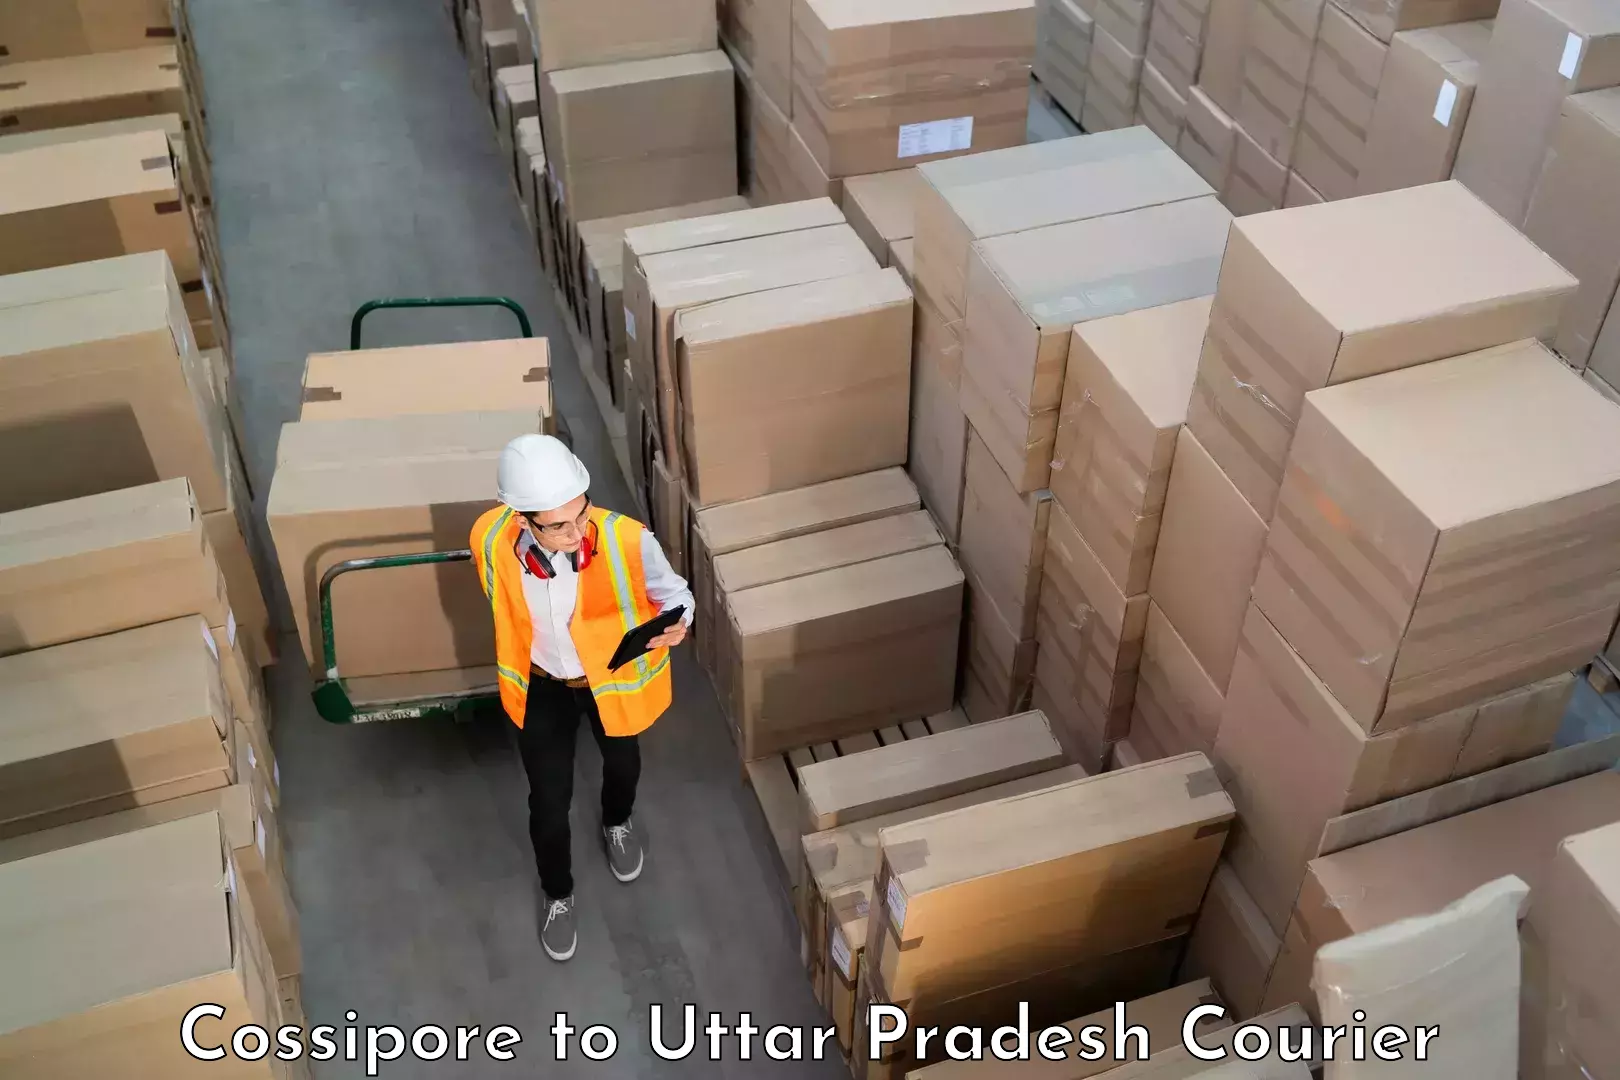 Urgent luggage shipment in Cossipore to Sultanpur Avadh